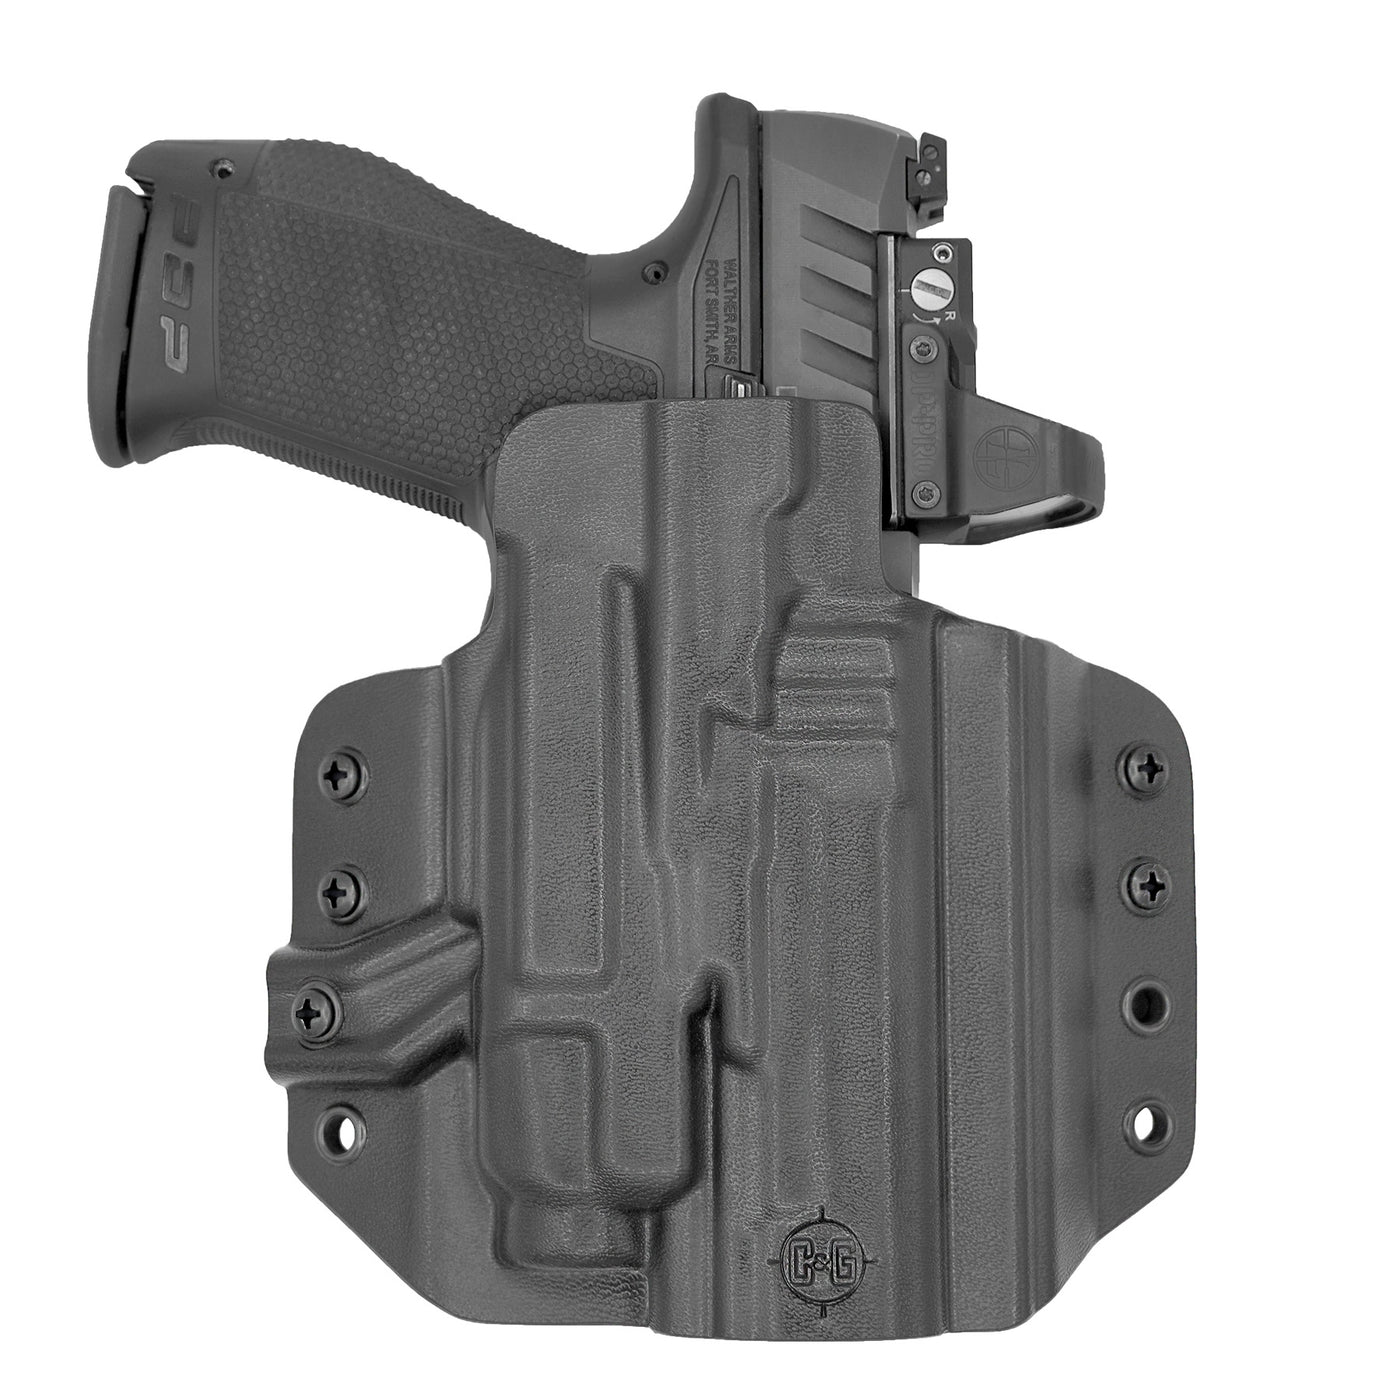 C&G Holsters custom OWB Tactical Walther PDP Streamlight TLR7/a in holstered position